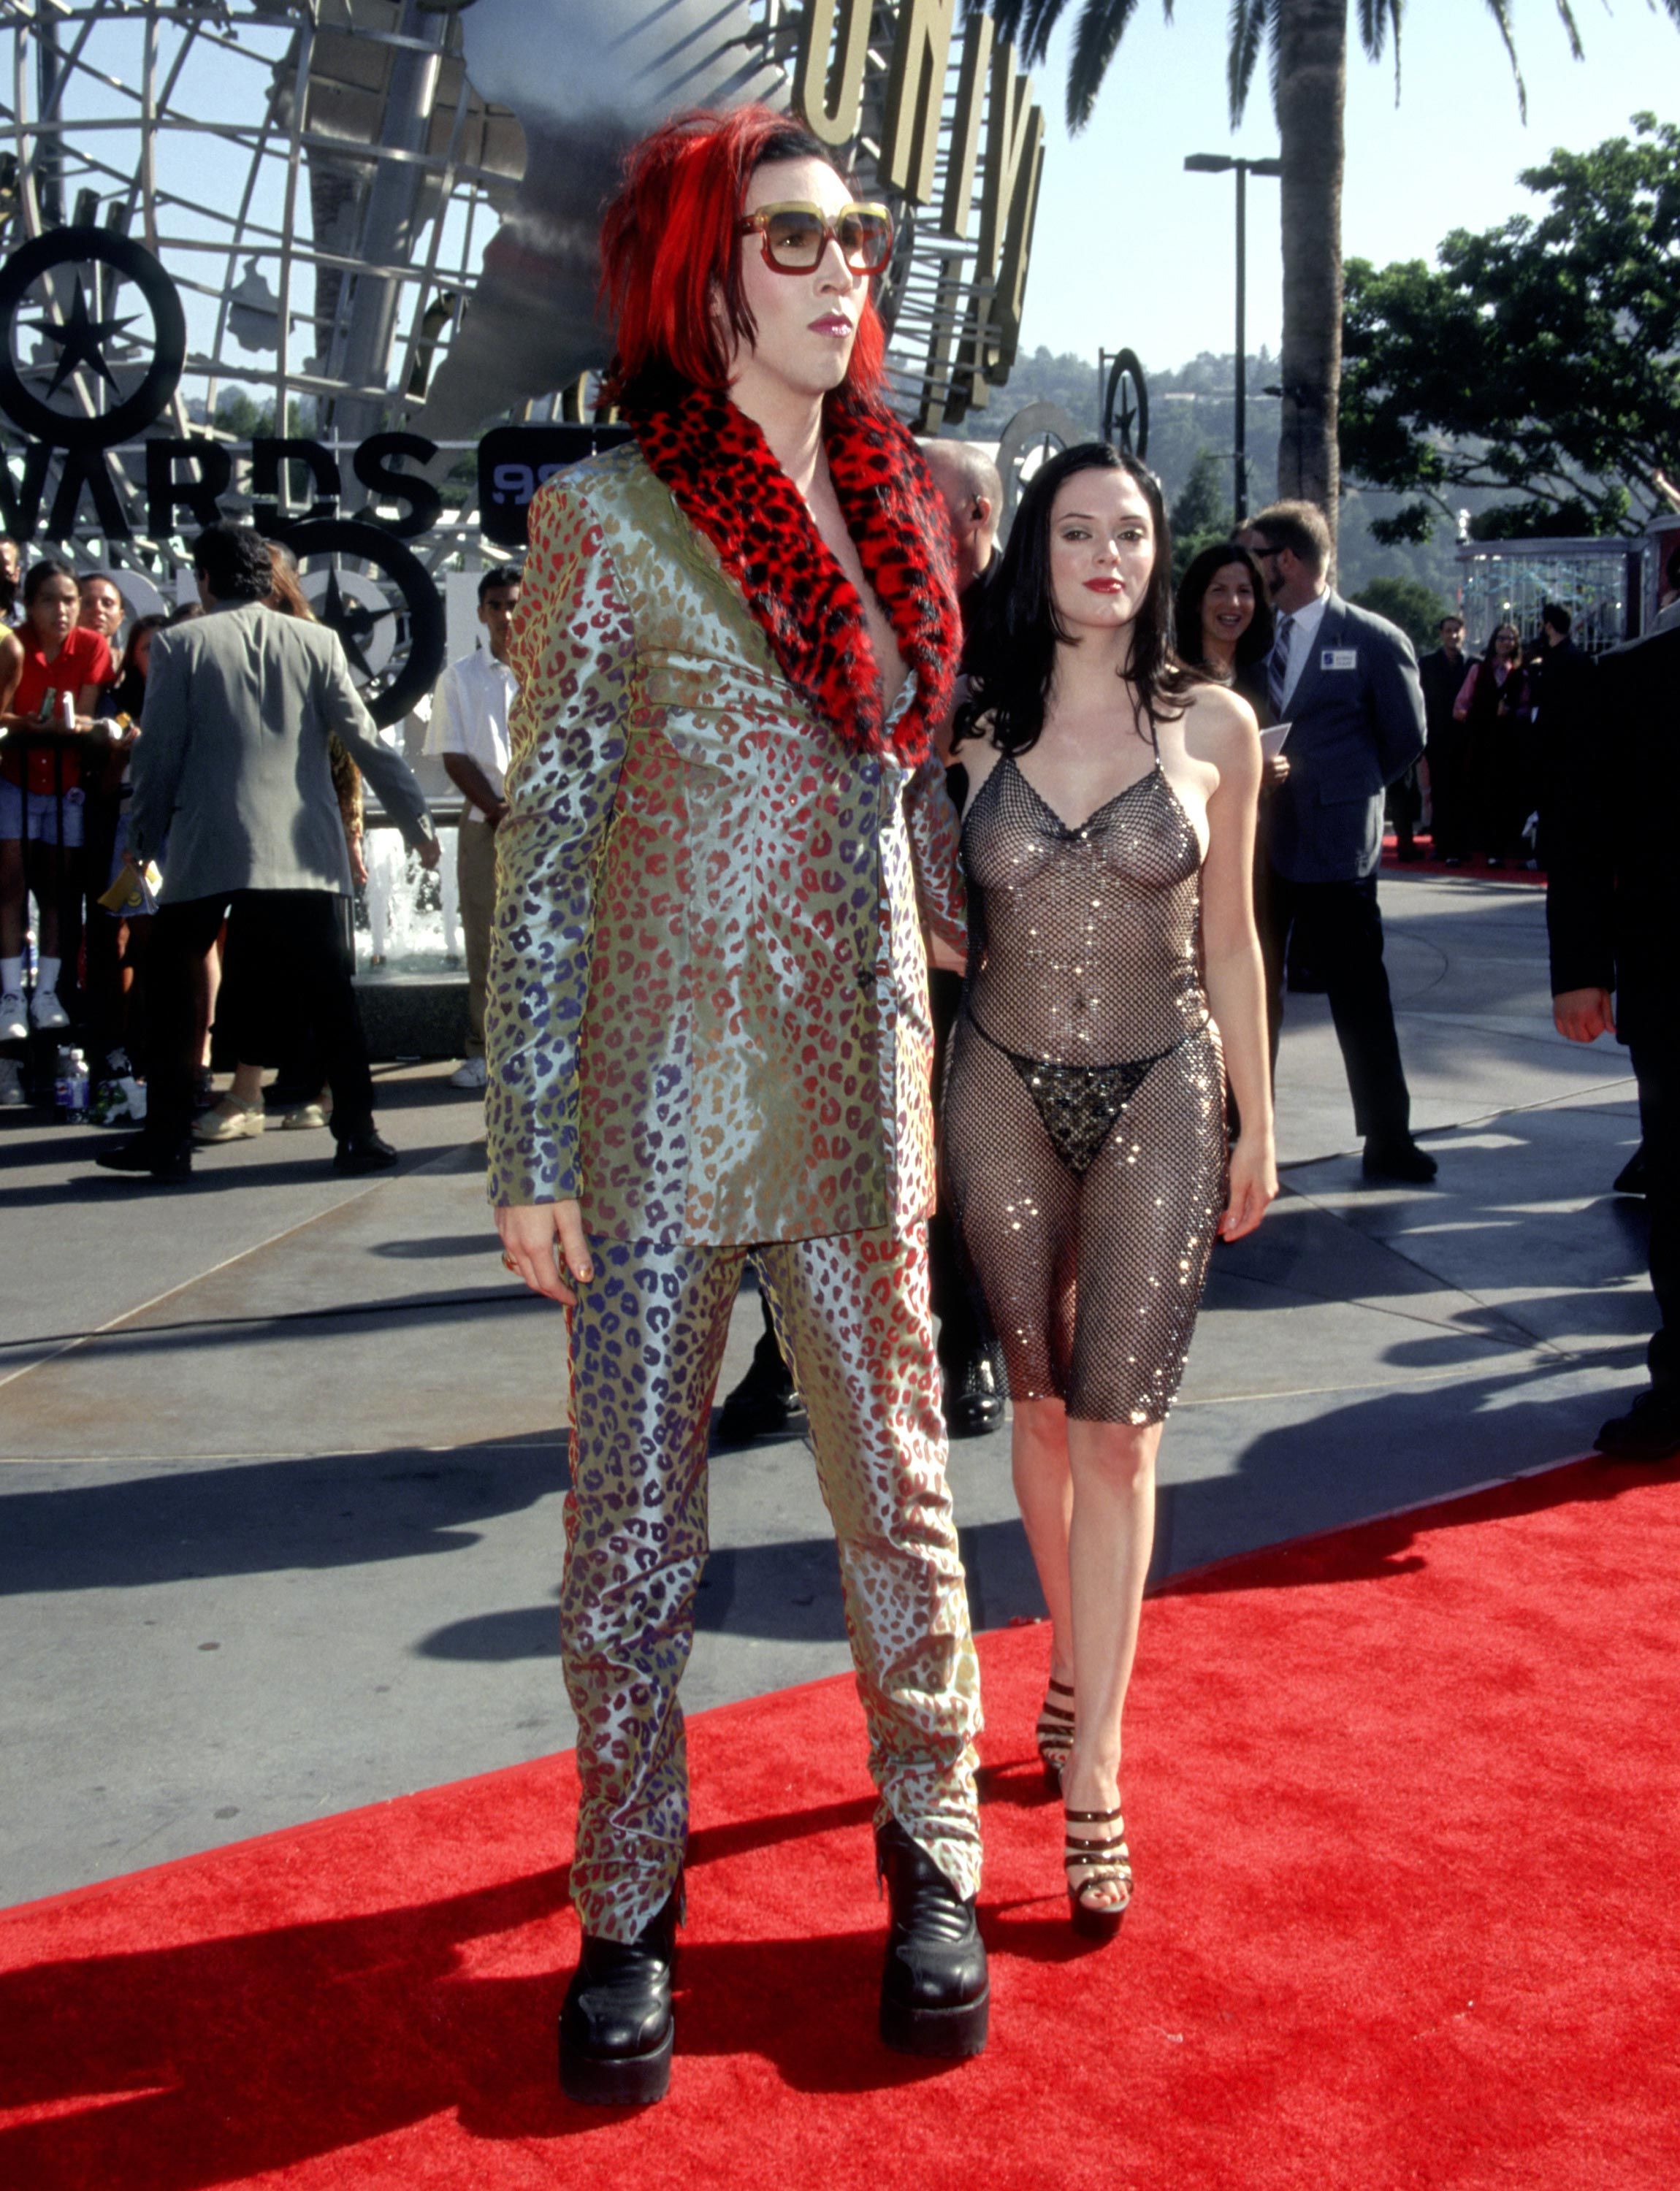 Sexiest Red Carpet Dresses Ever - 47 Scandalous Dresses That Made People Lose Their Sh*t